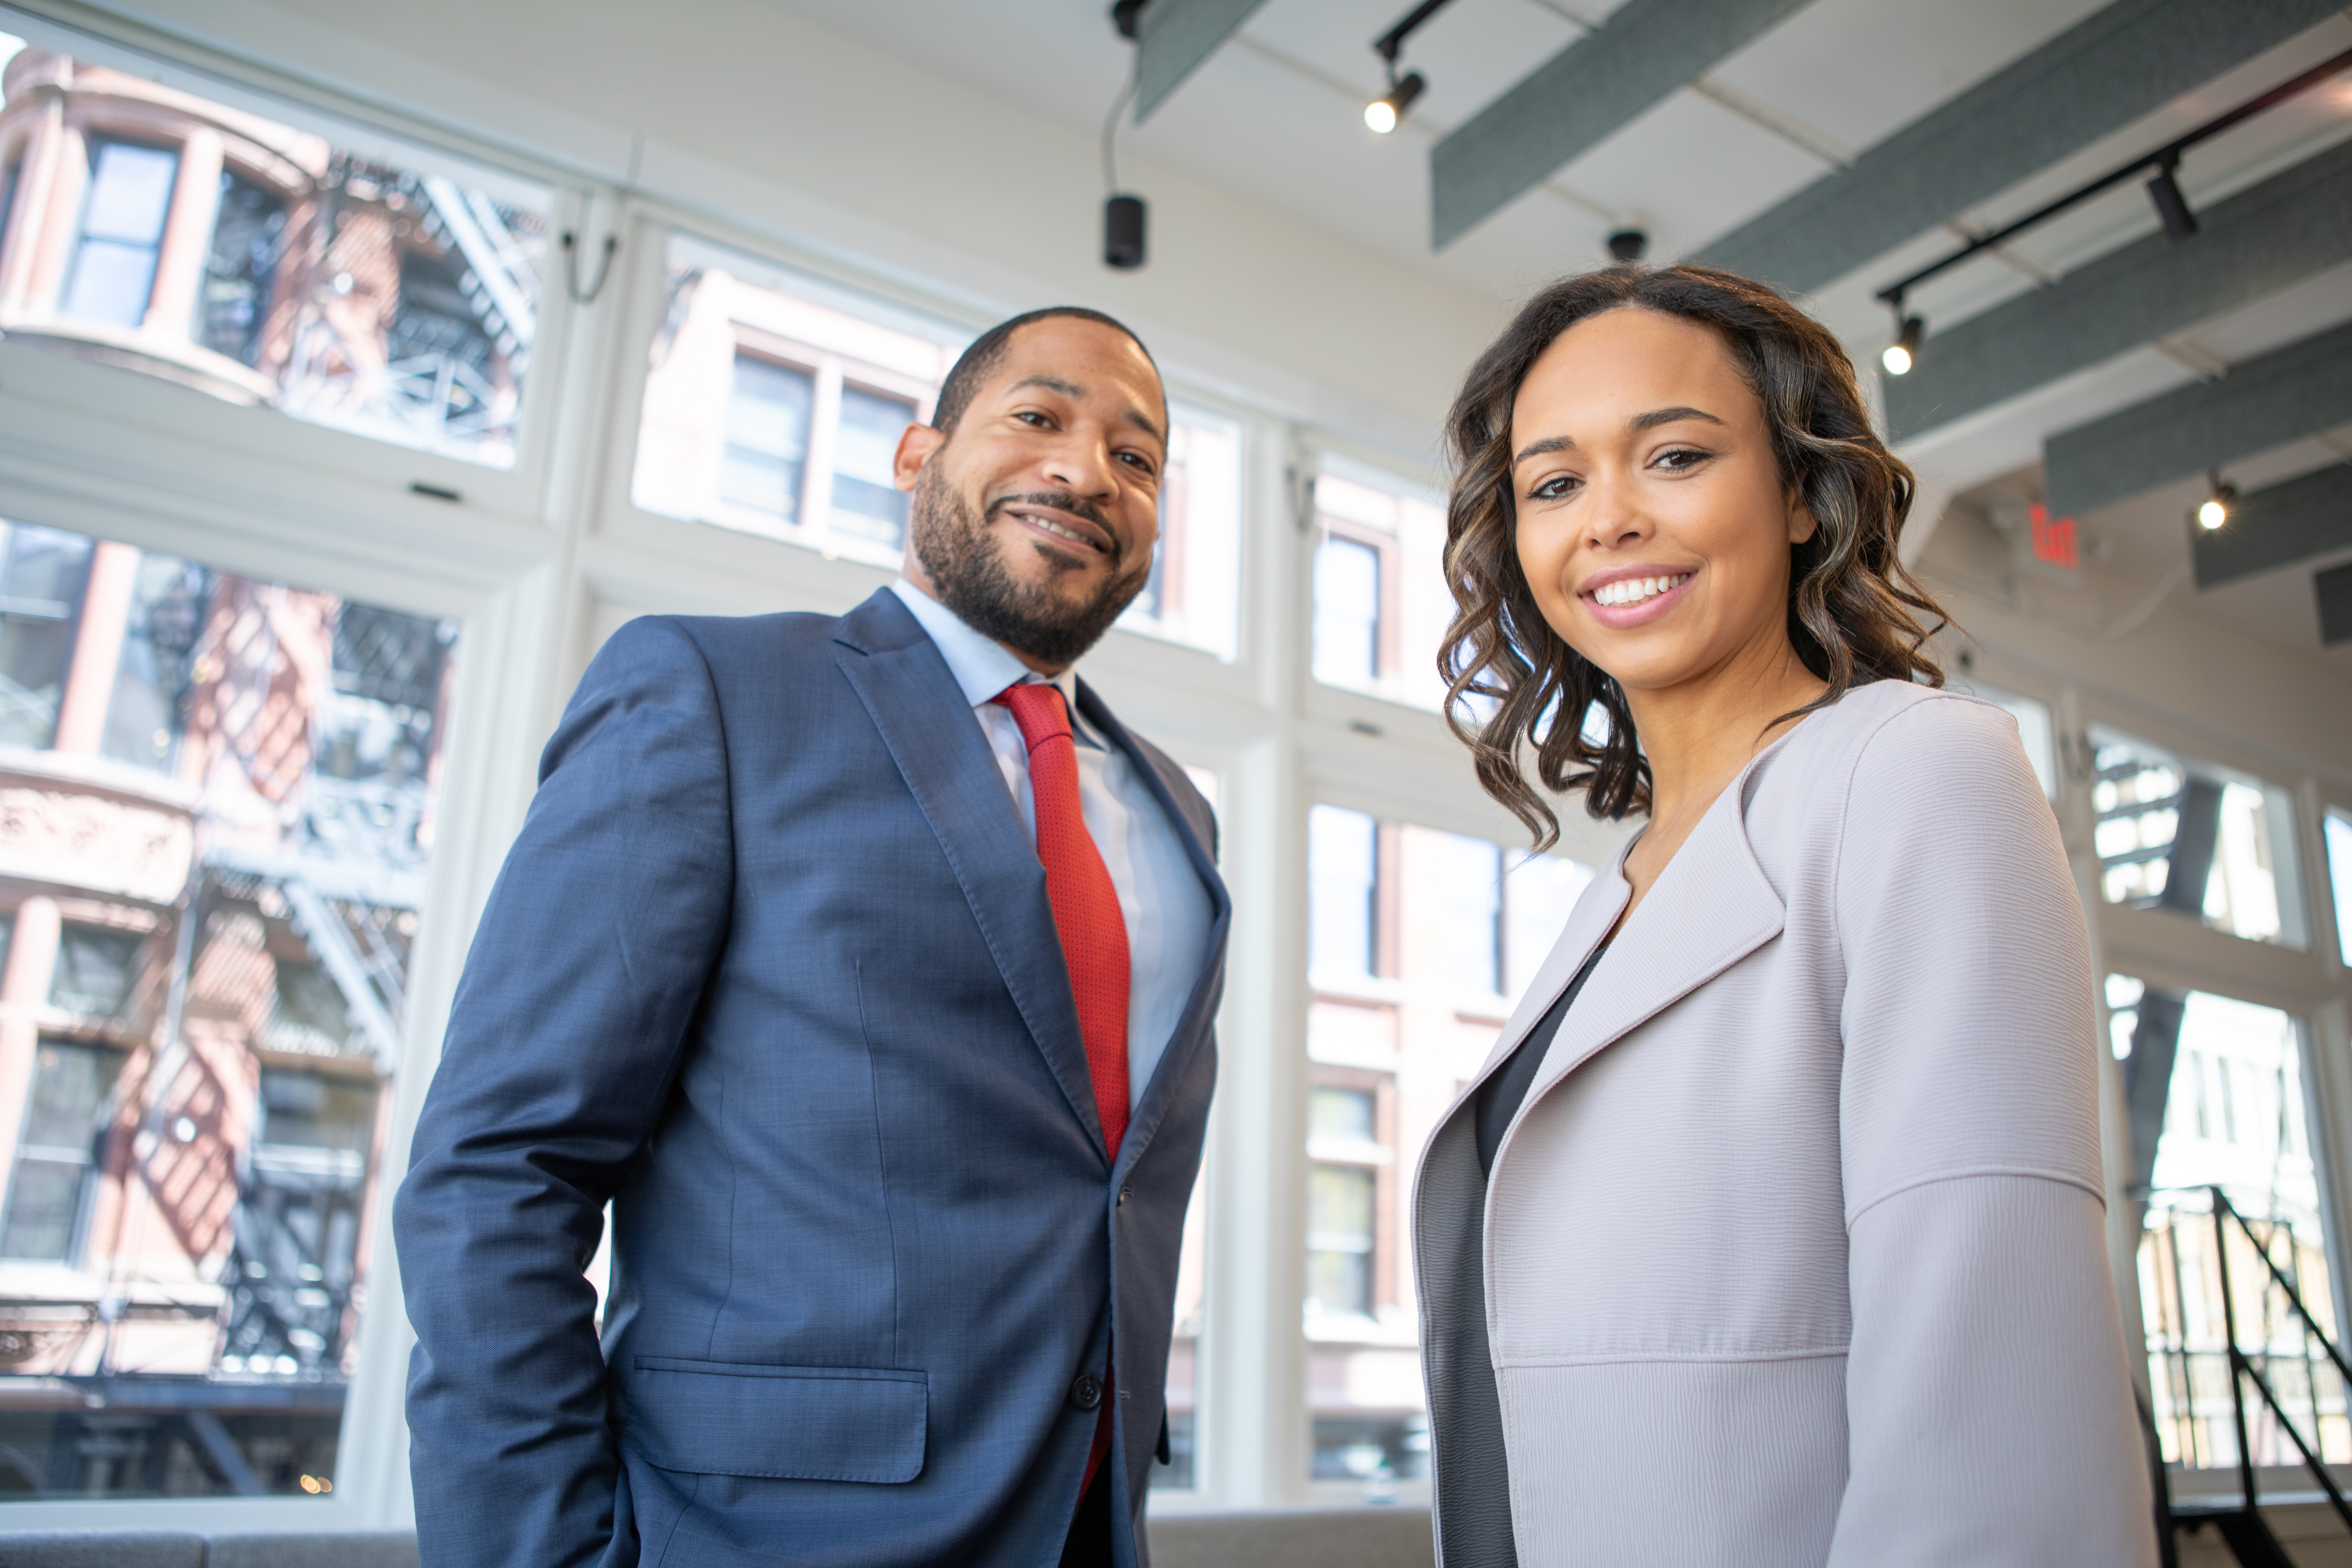 Motley Fool Ventures Invests $5M Into VC Funds Tackling Underrepresentation and Lack of Diversity